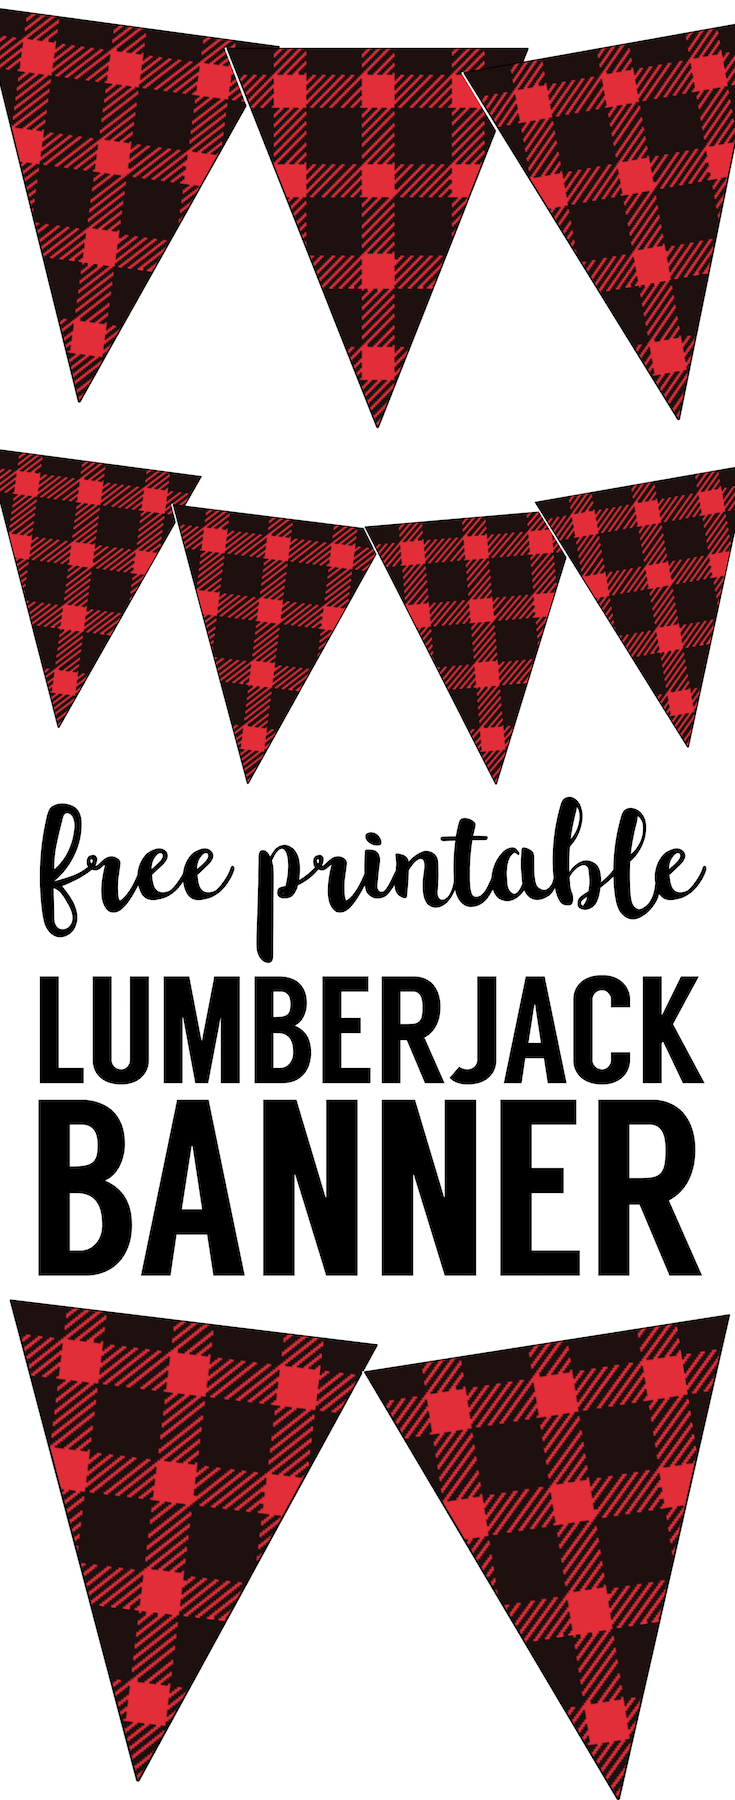 Lumberjack banner free printable. Print this DIY buffalo plaid or buffalo check flannel patterned banner for your birthday party, baby shower, or Christmas decorations. 